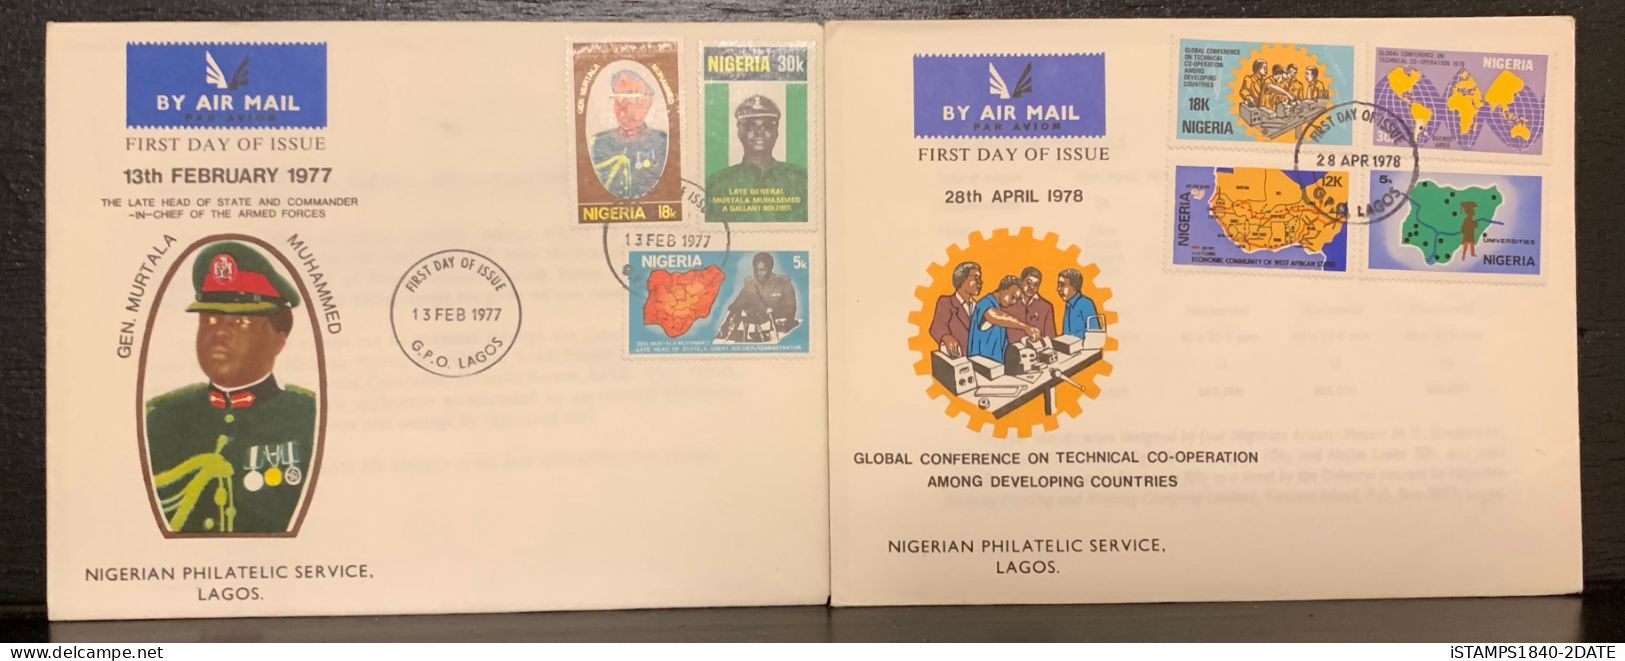 001151/ Nigeria First Day Cover Collection (55) 1973-1985